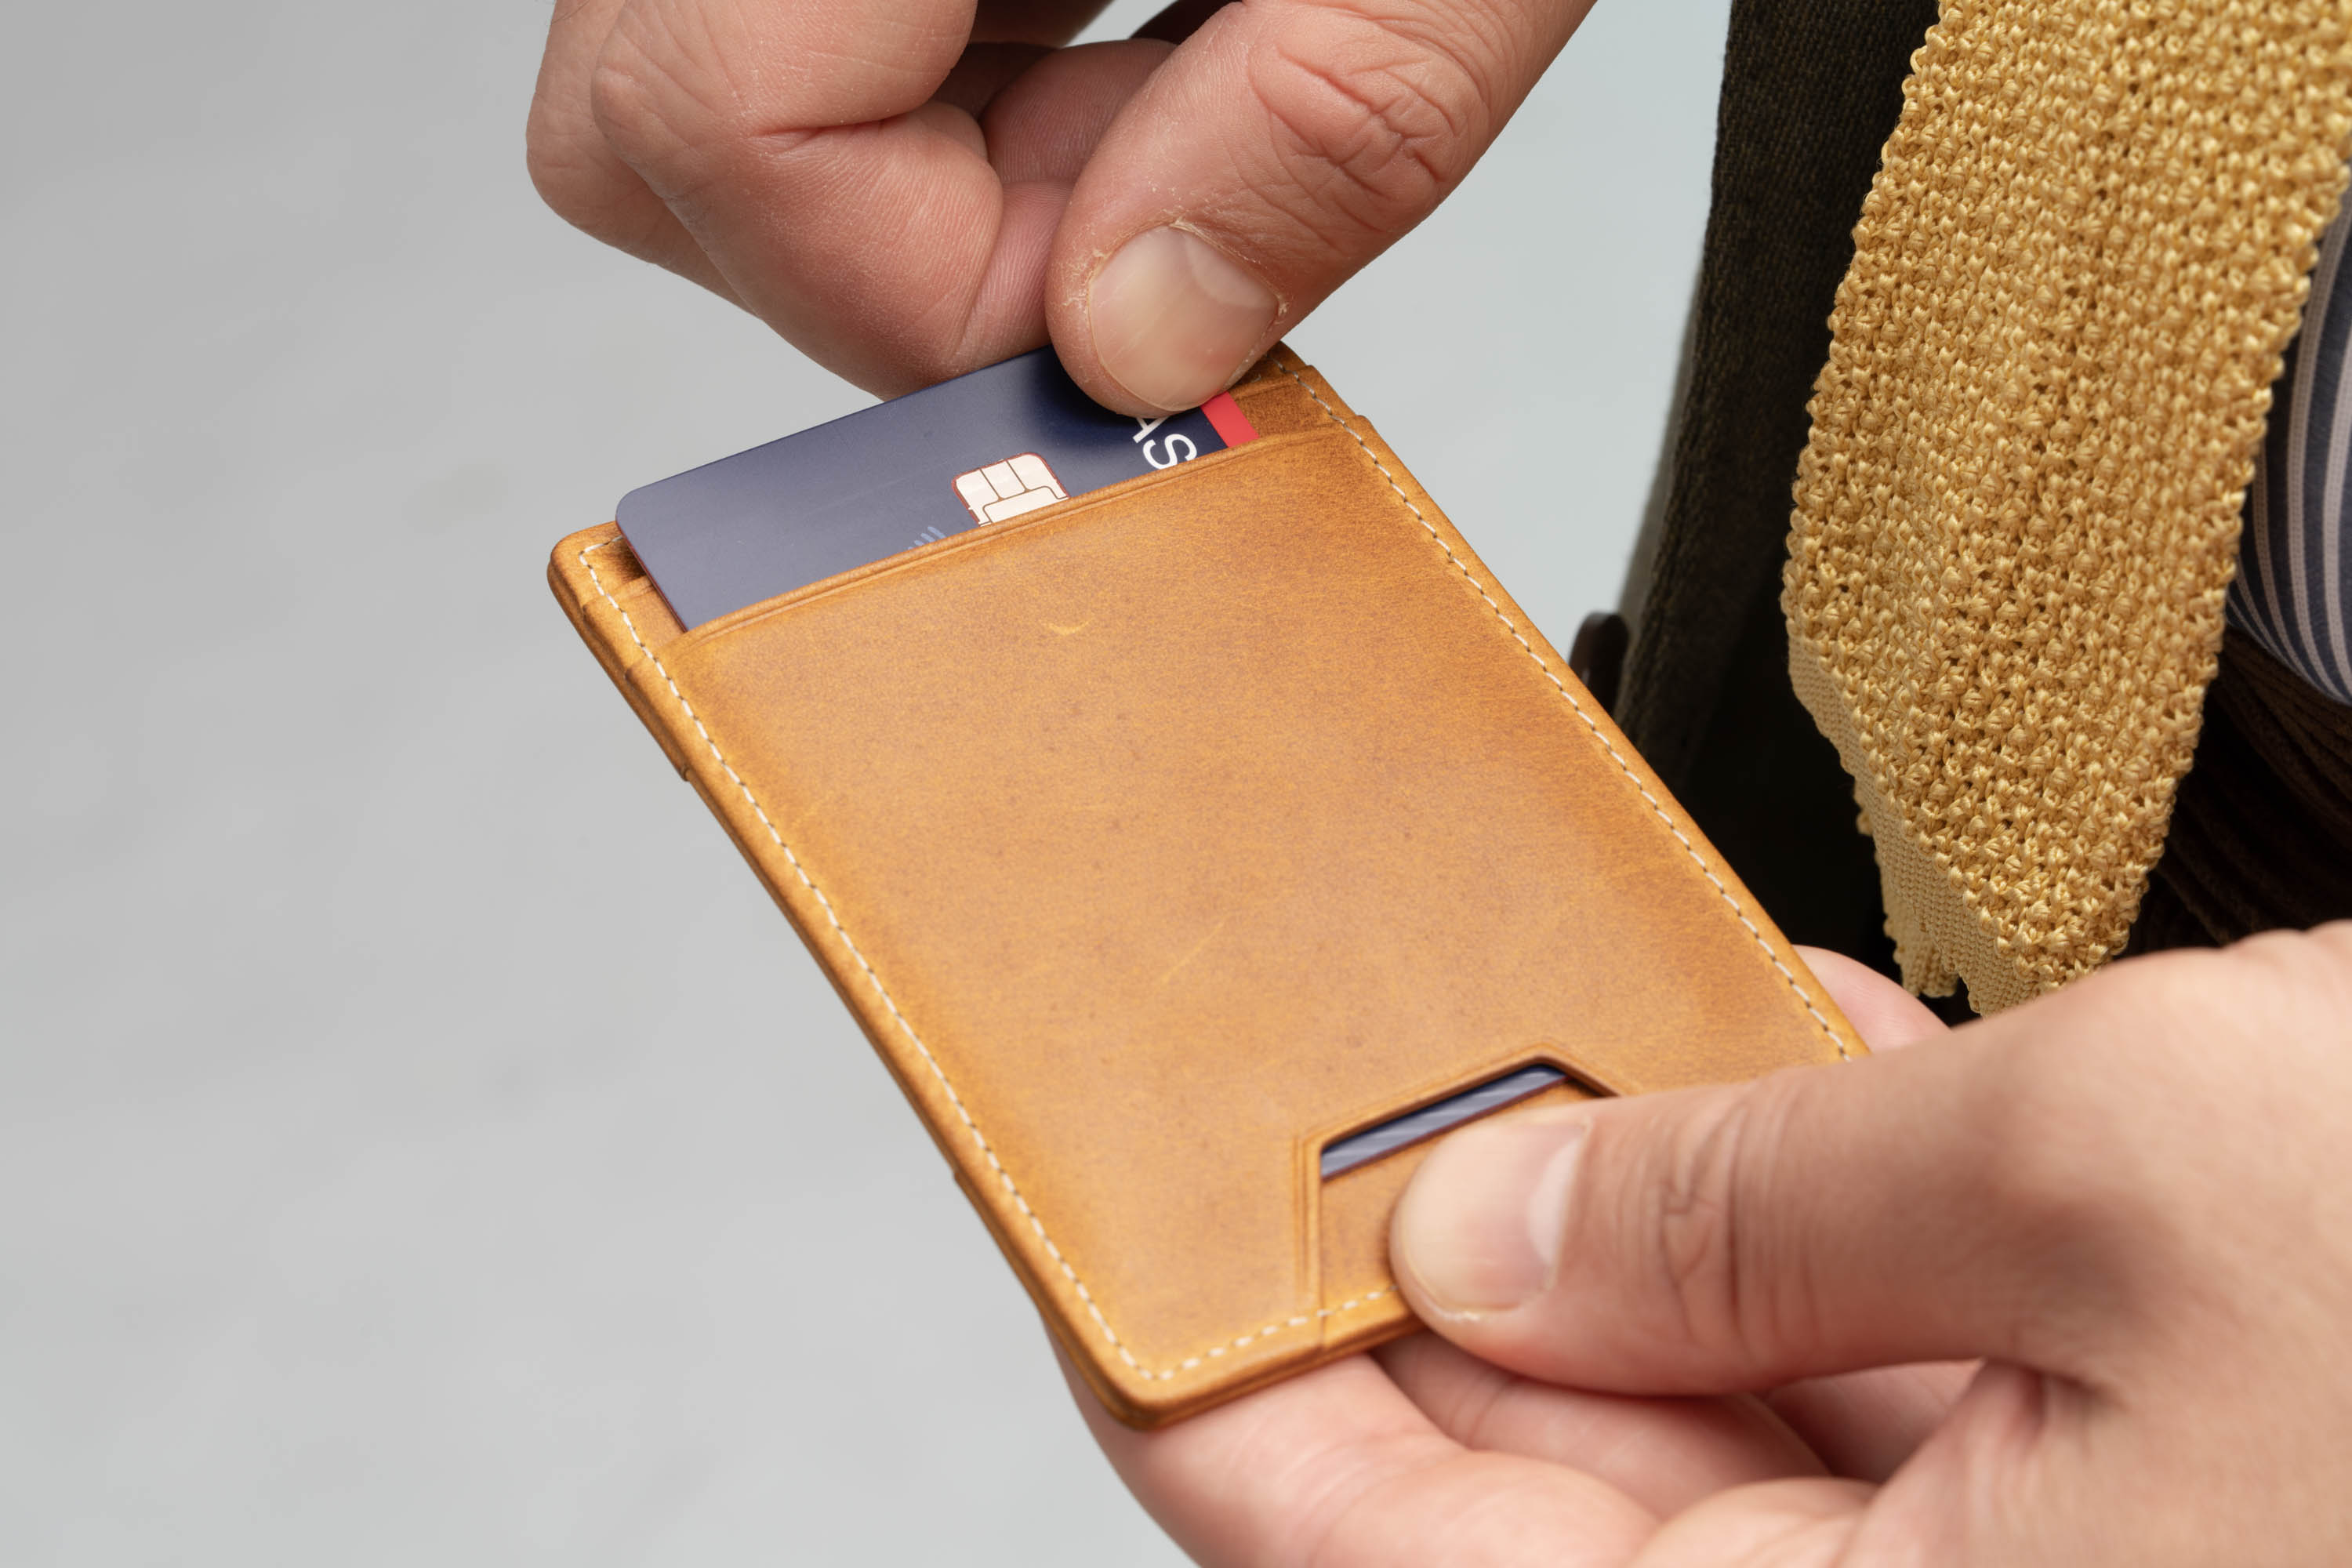 Slim Wallet - 4CC - Americana Vintage Gold Full-Grain Leather comes with an RFID blocking feature. 